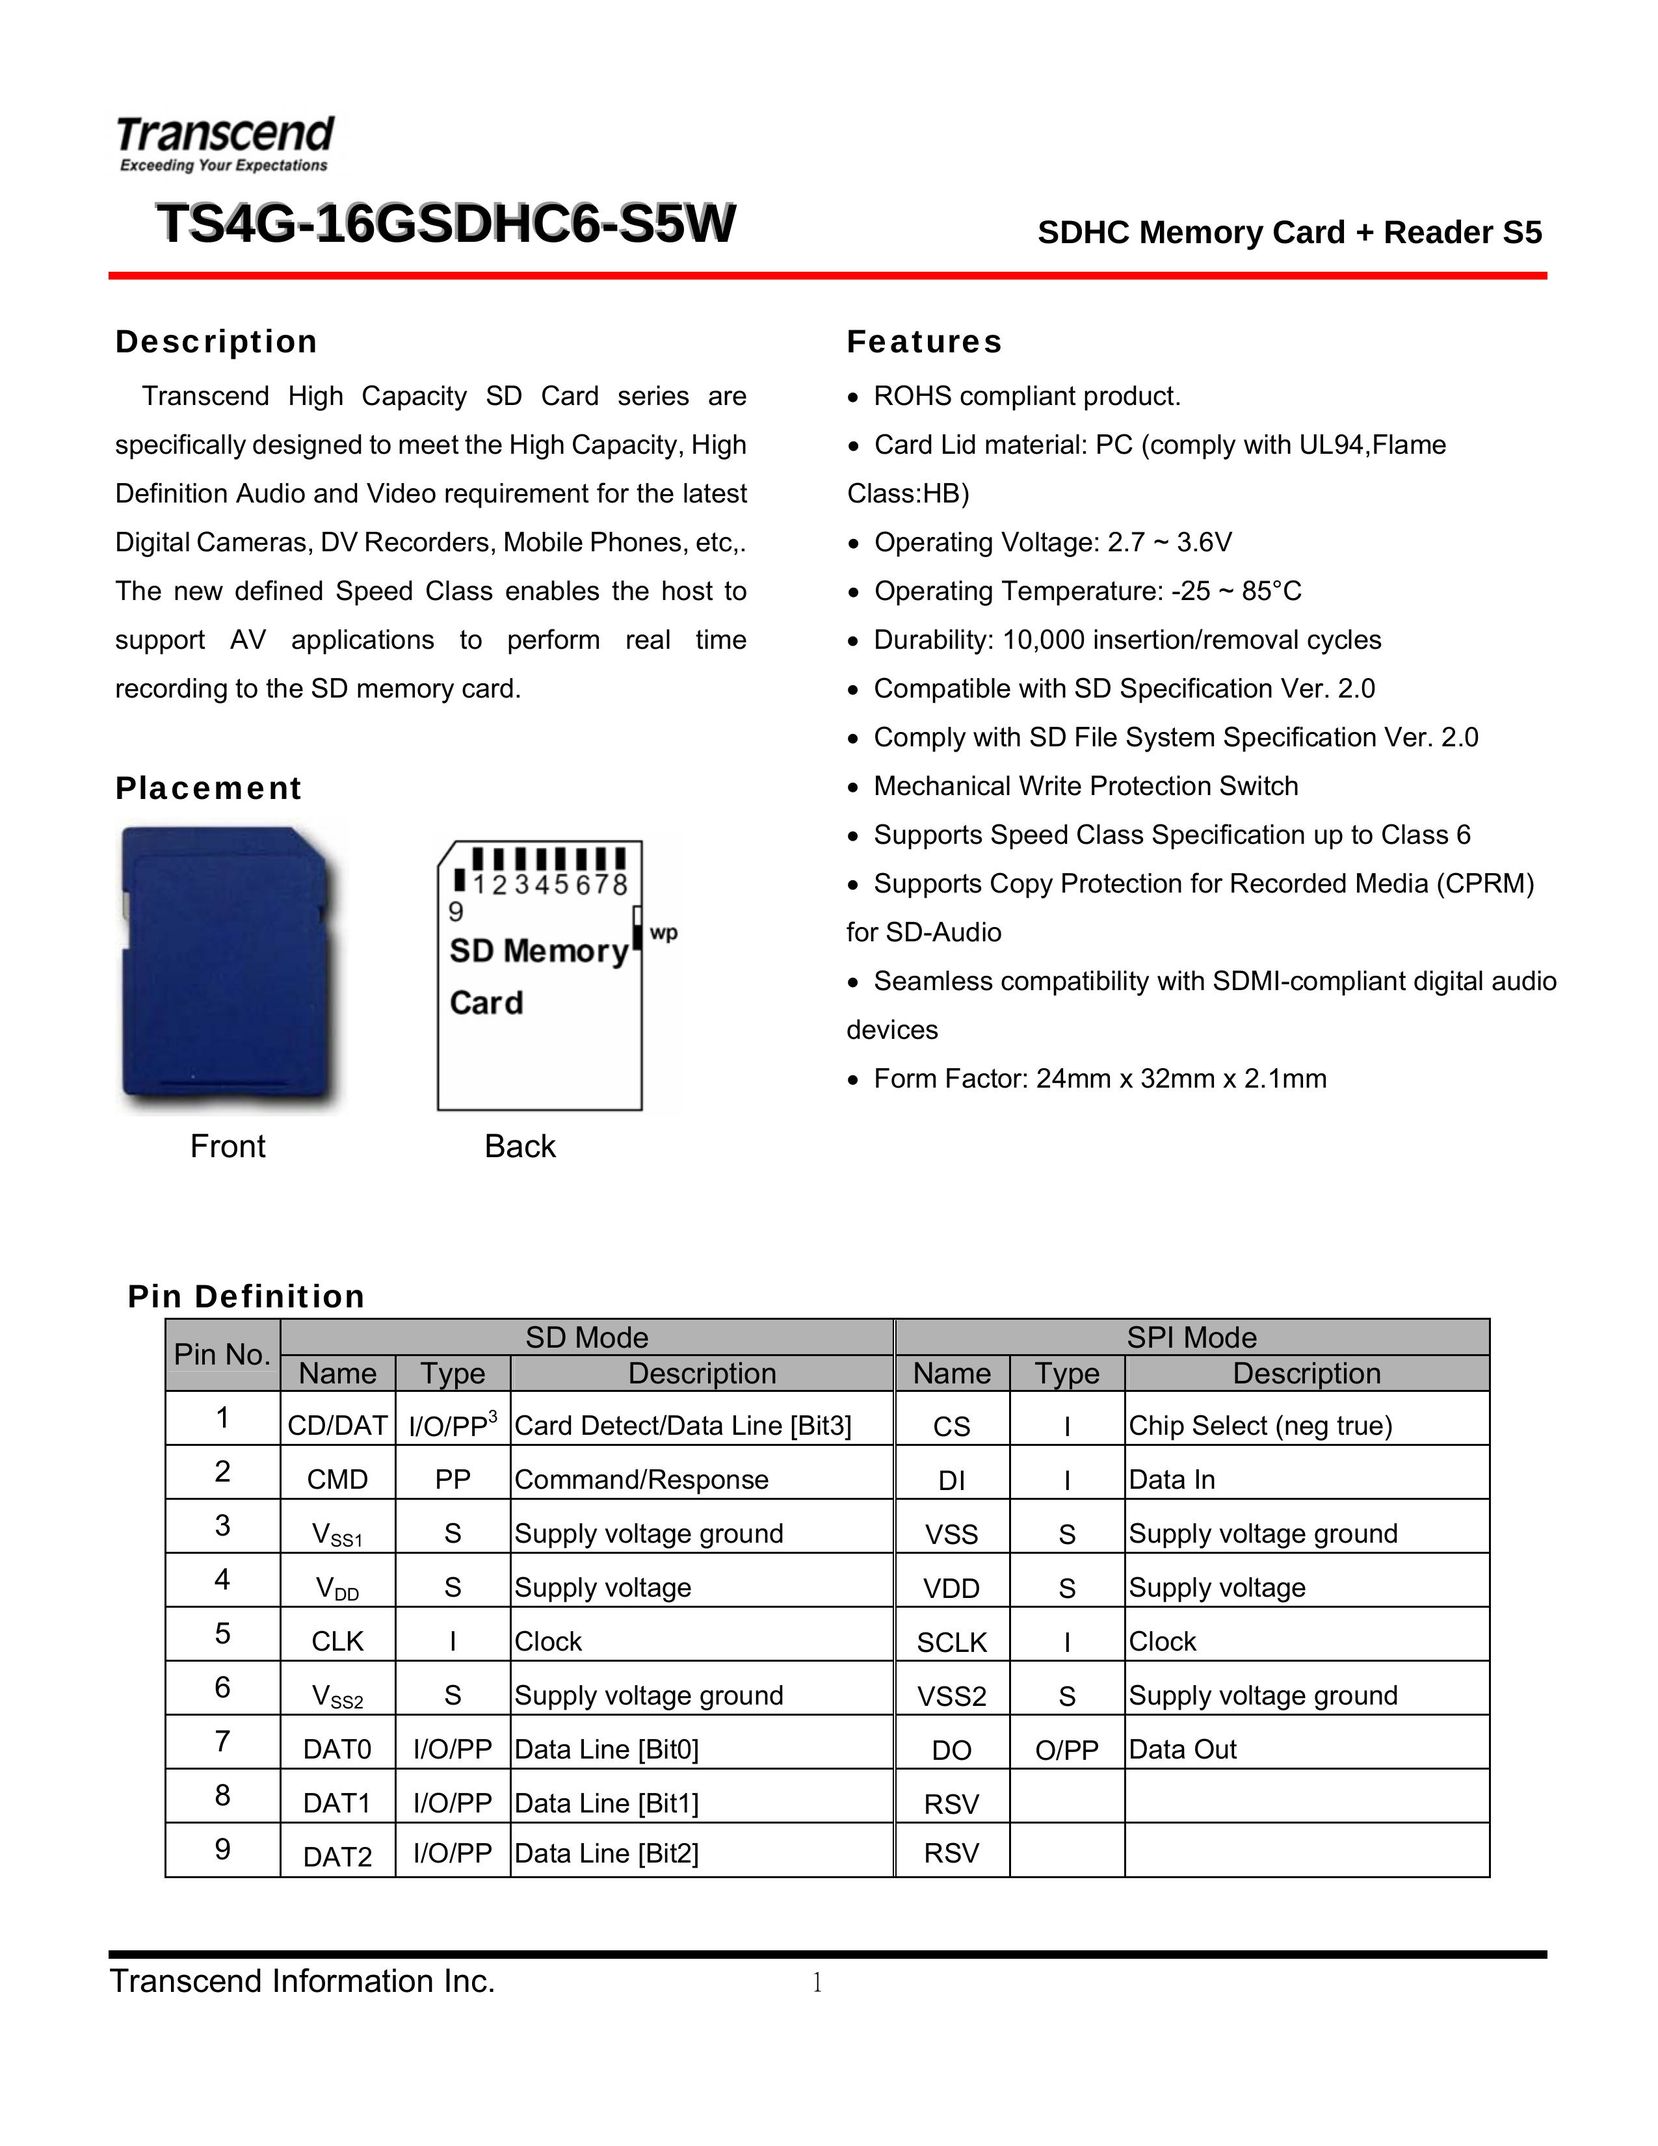 Transcend Information TS4G-16GSDHC6- S5W Network Card User Manual